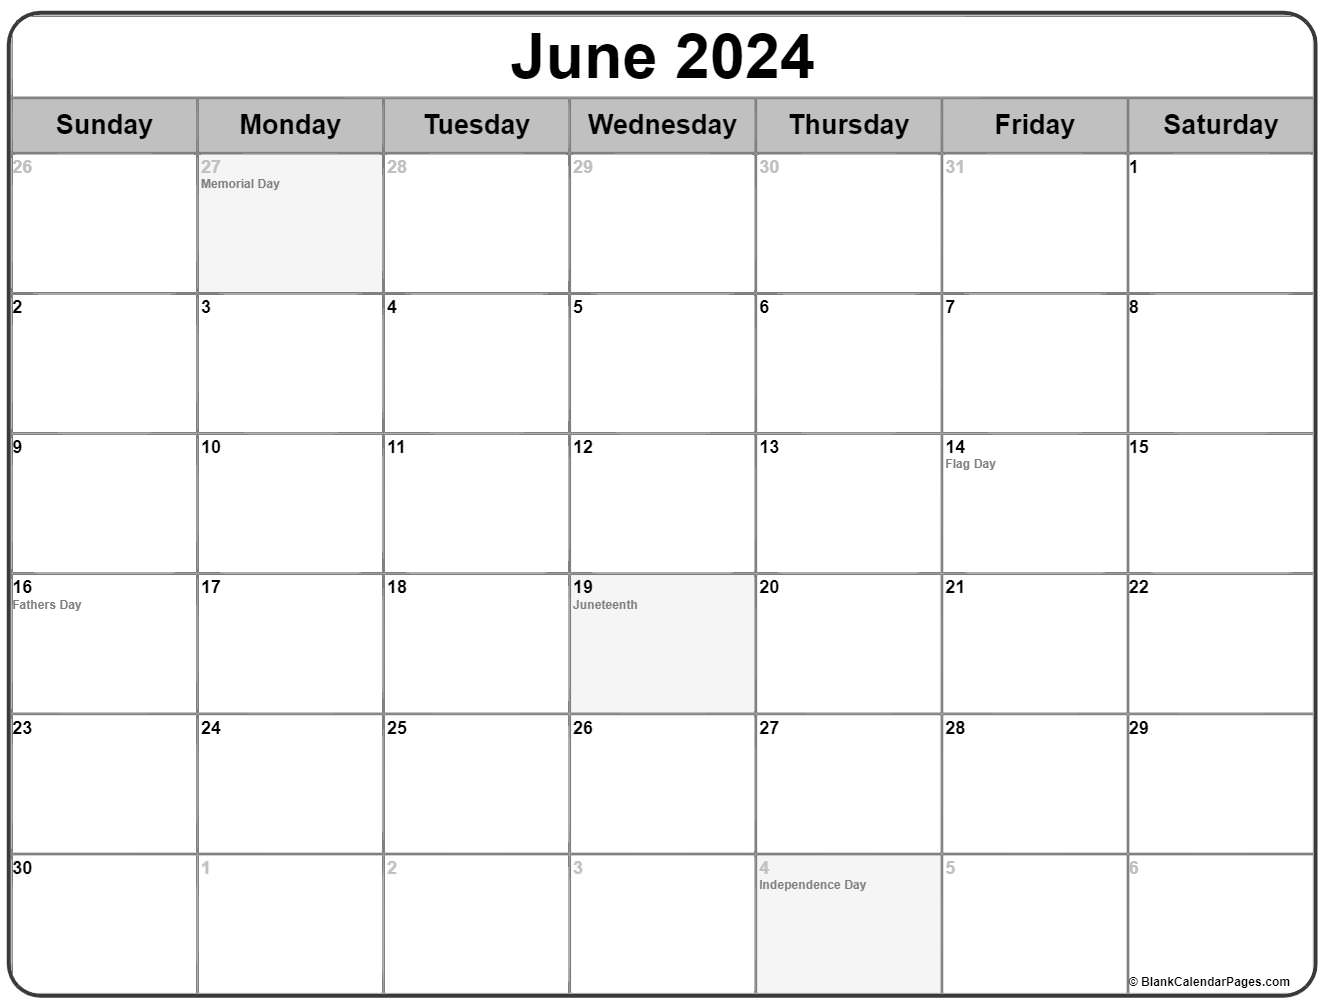 Collection of June 2020 calendars with holidays